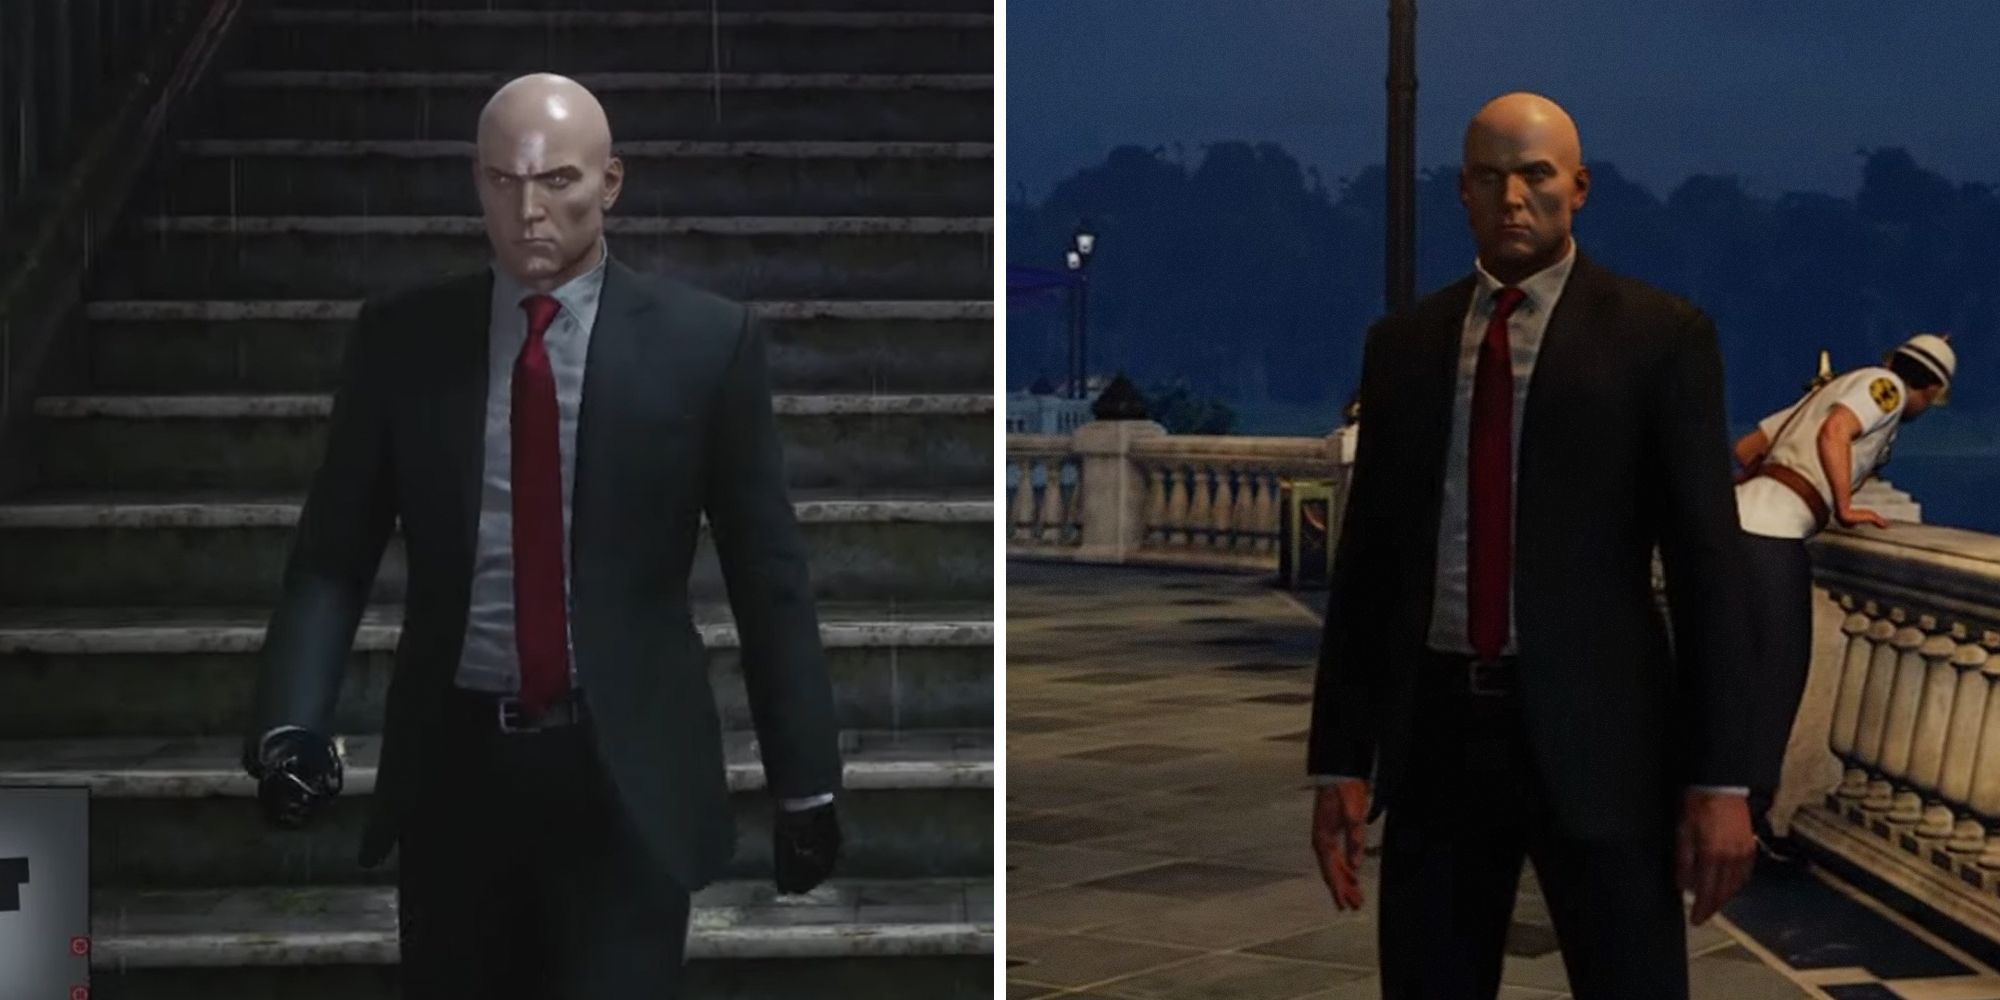 Hitman Agent 47's iconic outfit.